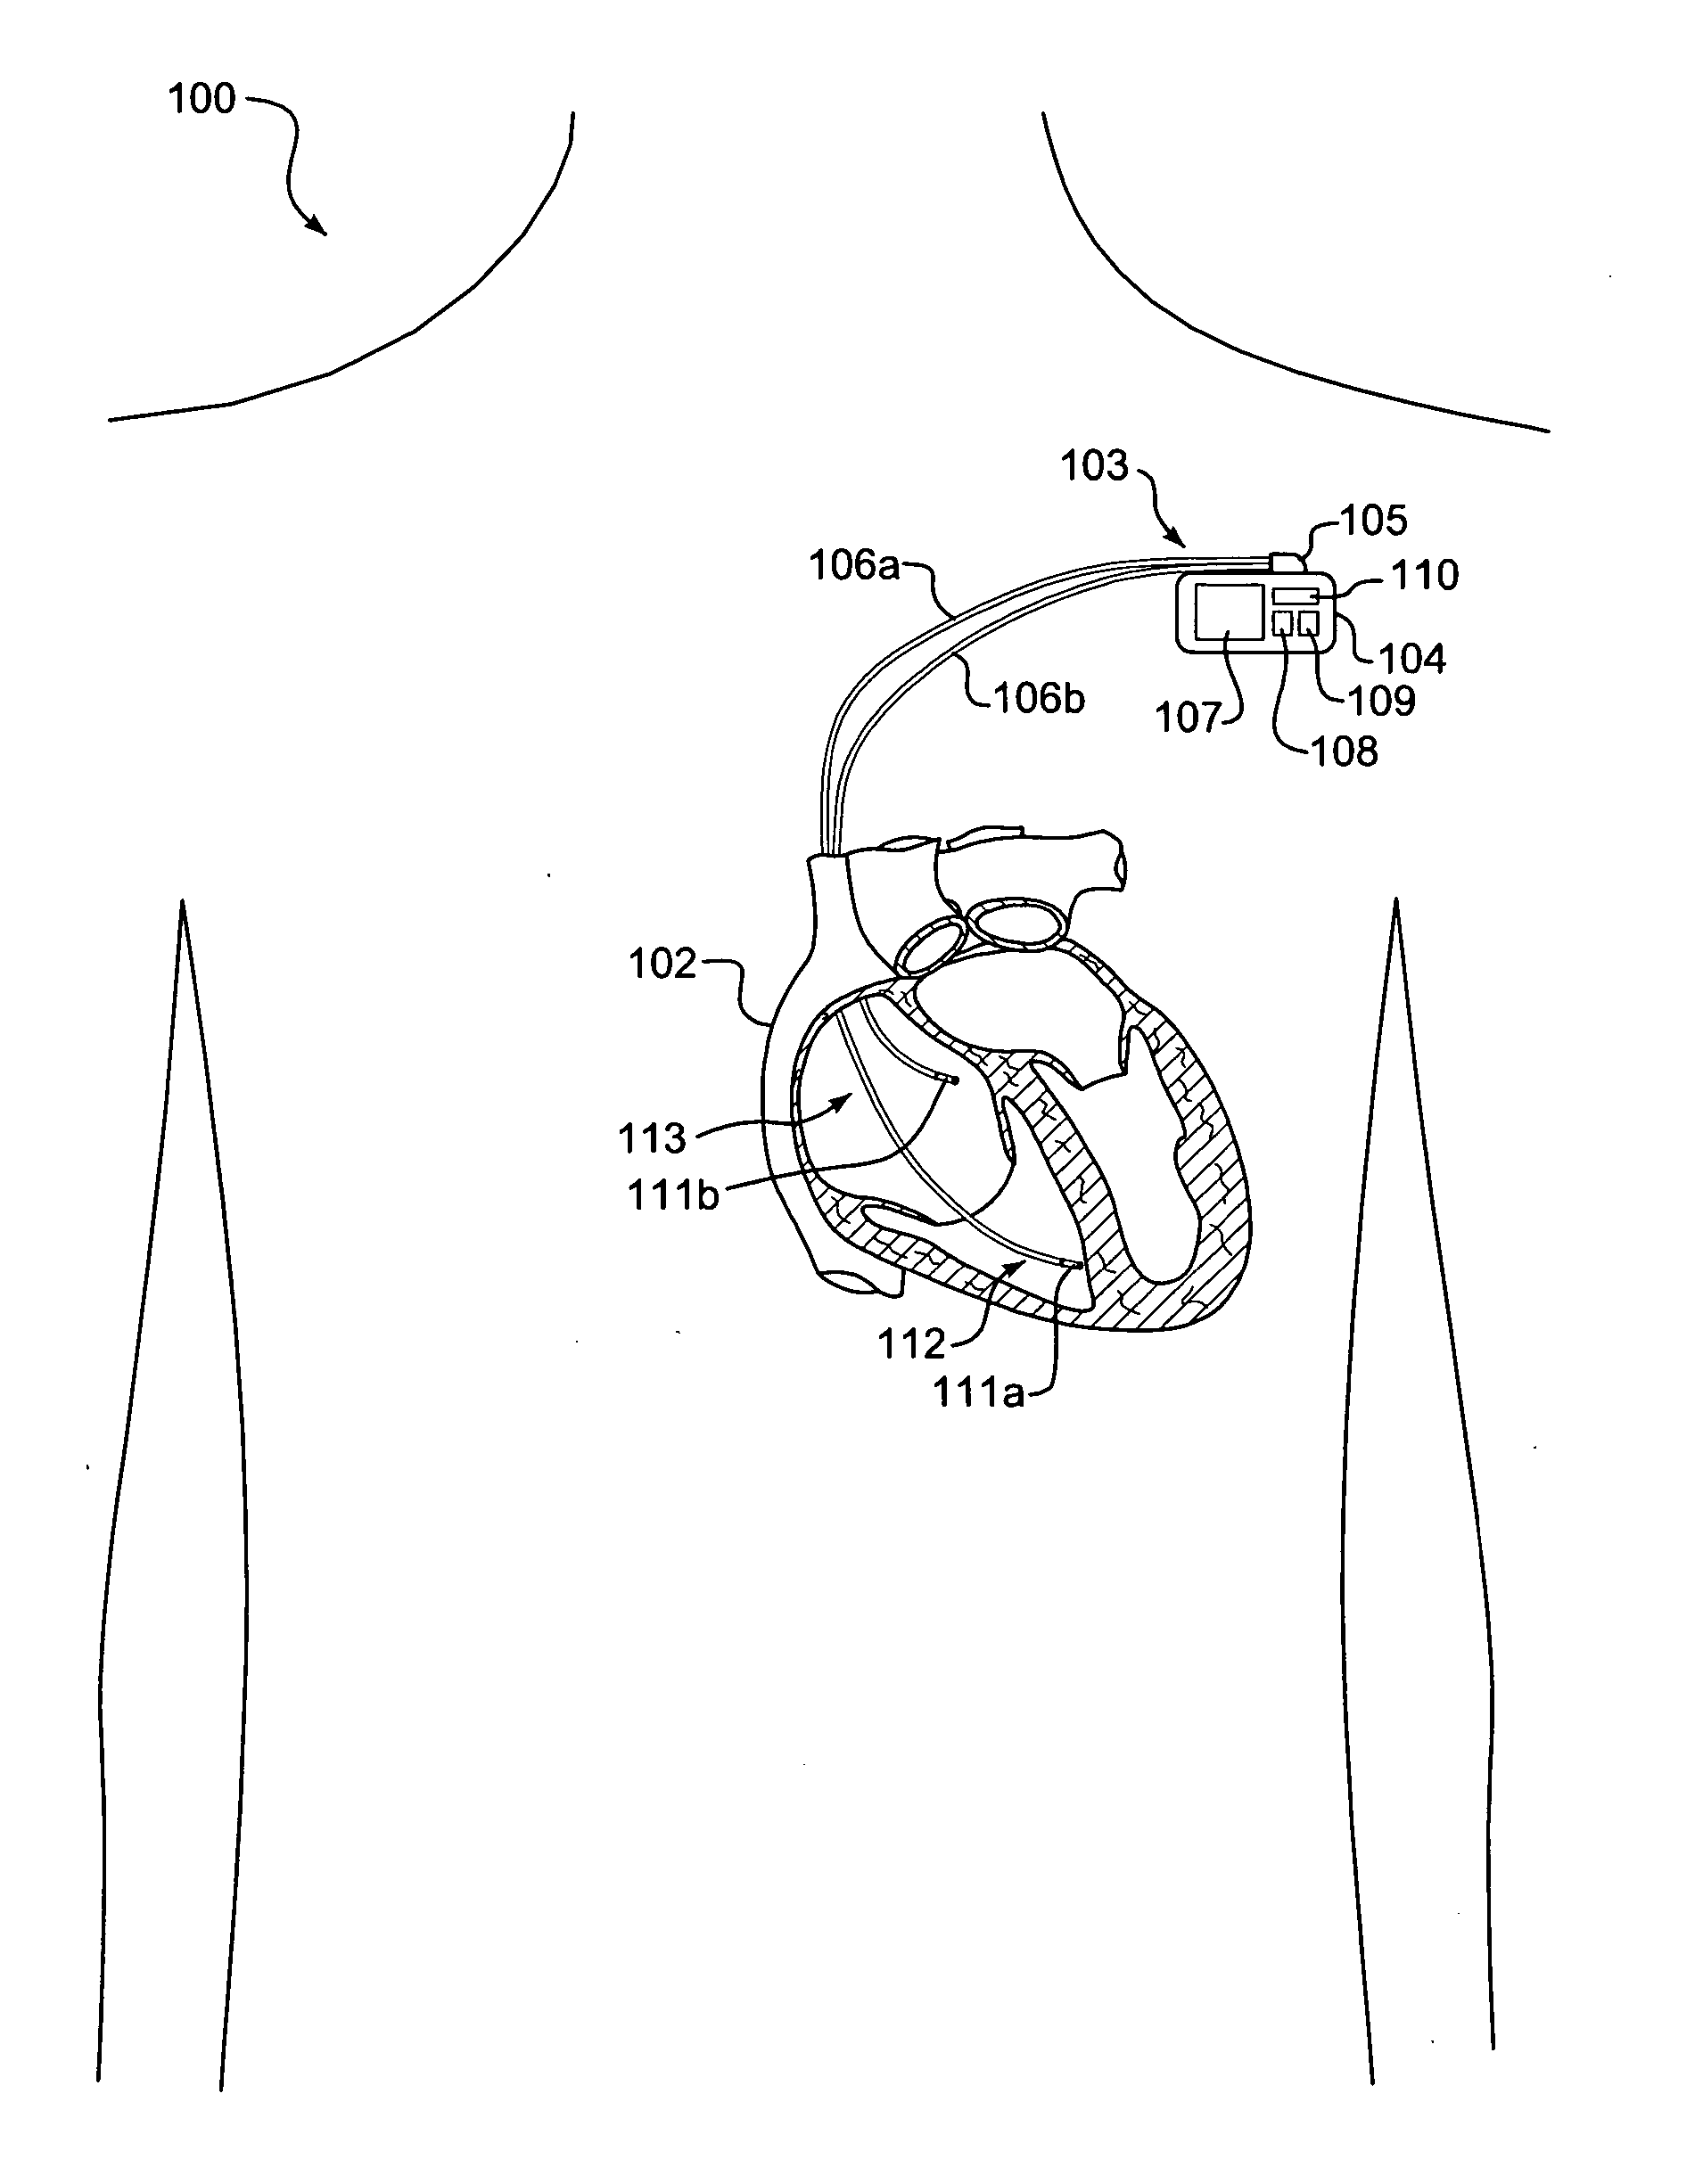 Patient management device for portably interfacing with a plurality of implantable medical devices and method thereof